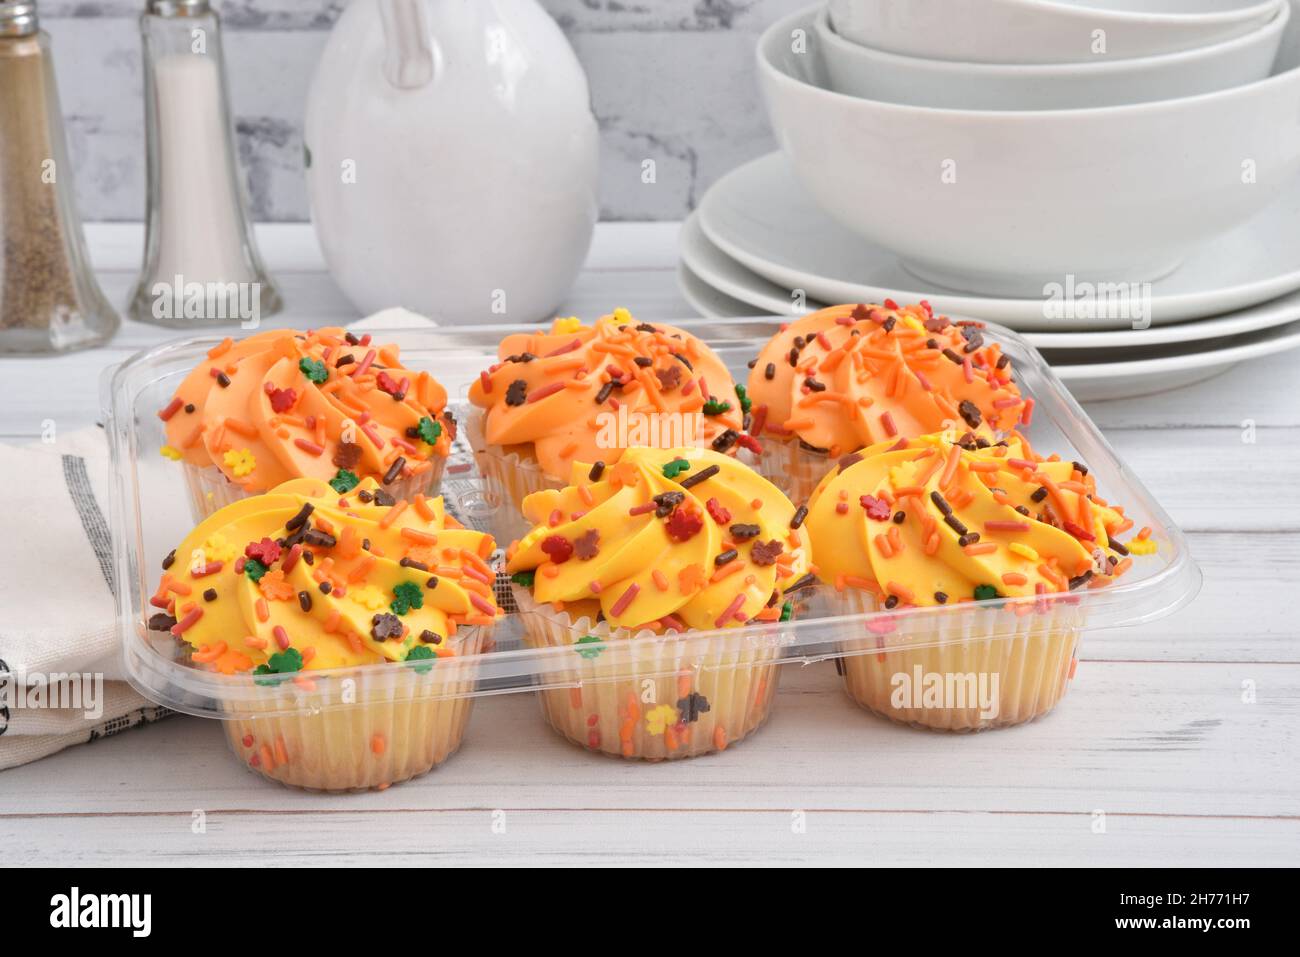 Container of store bought Halloween cupcakes on a rustic white wooden table close up Stock Photo